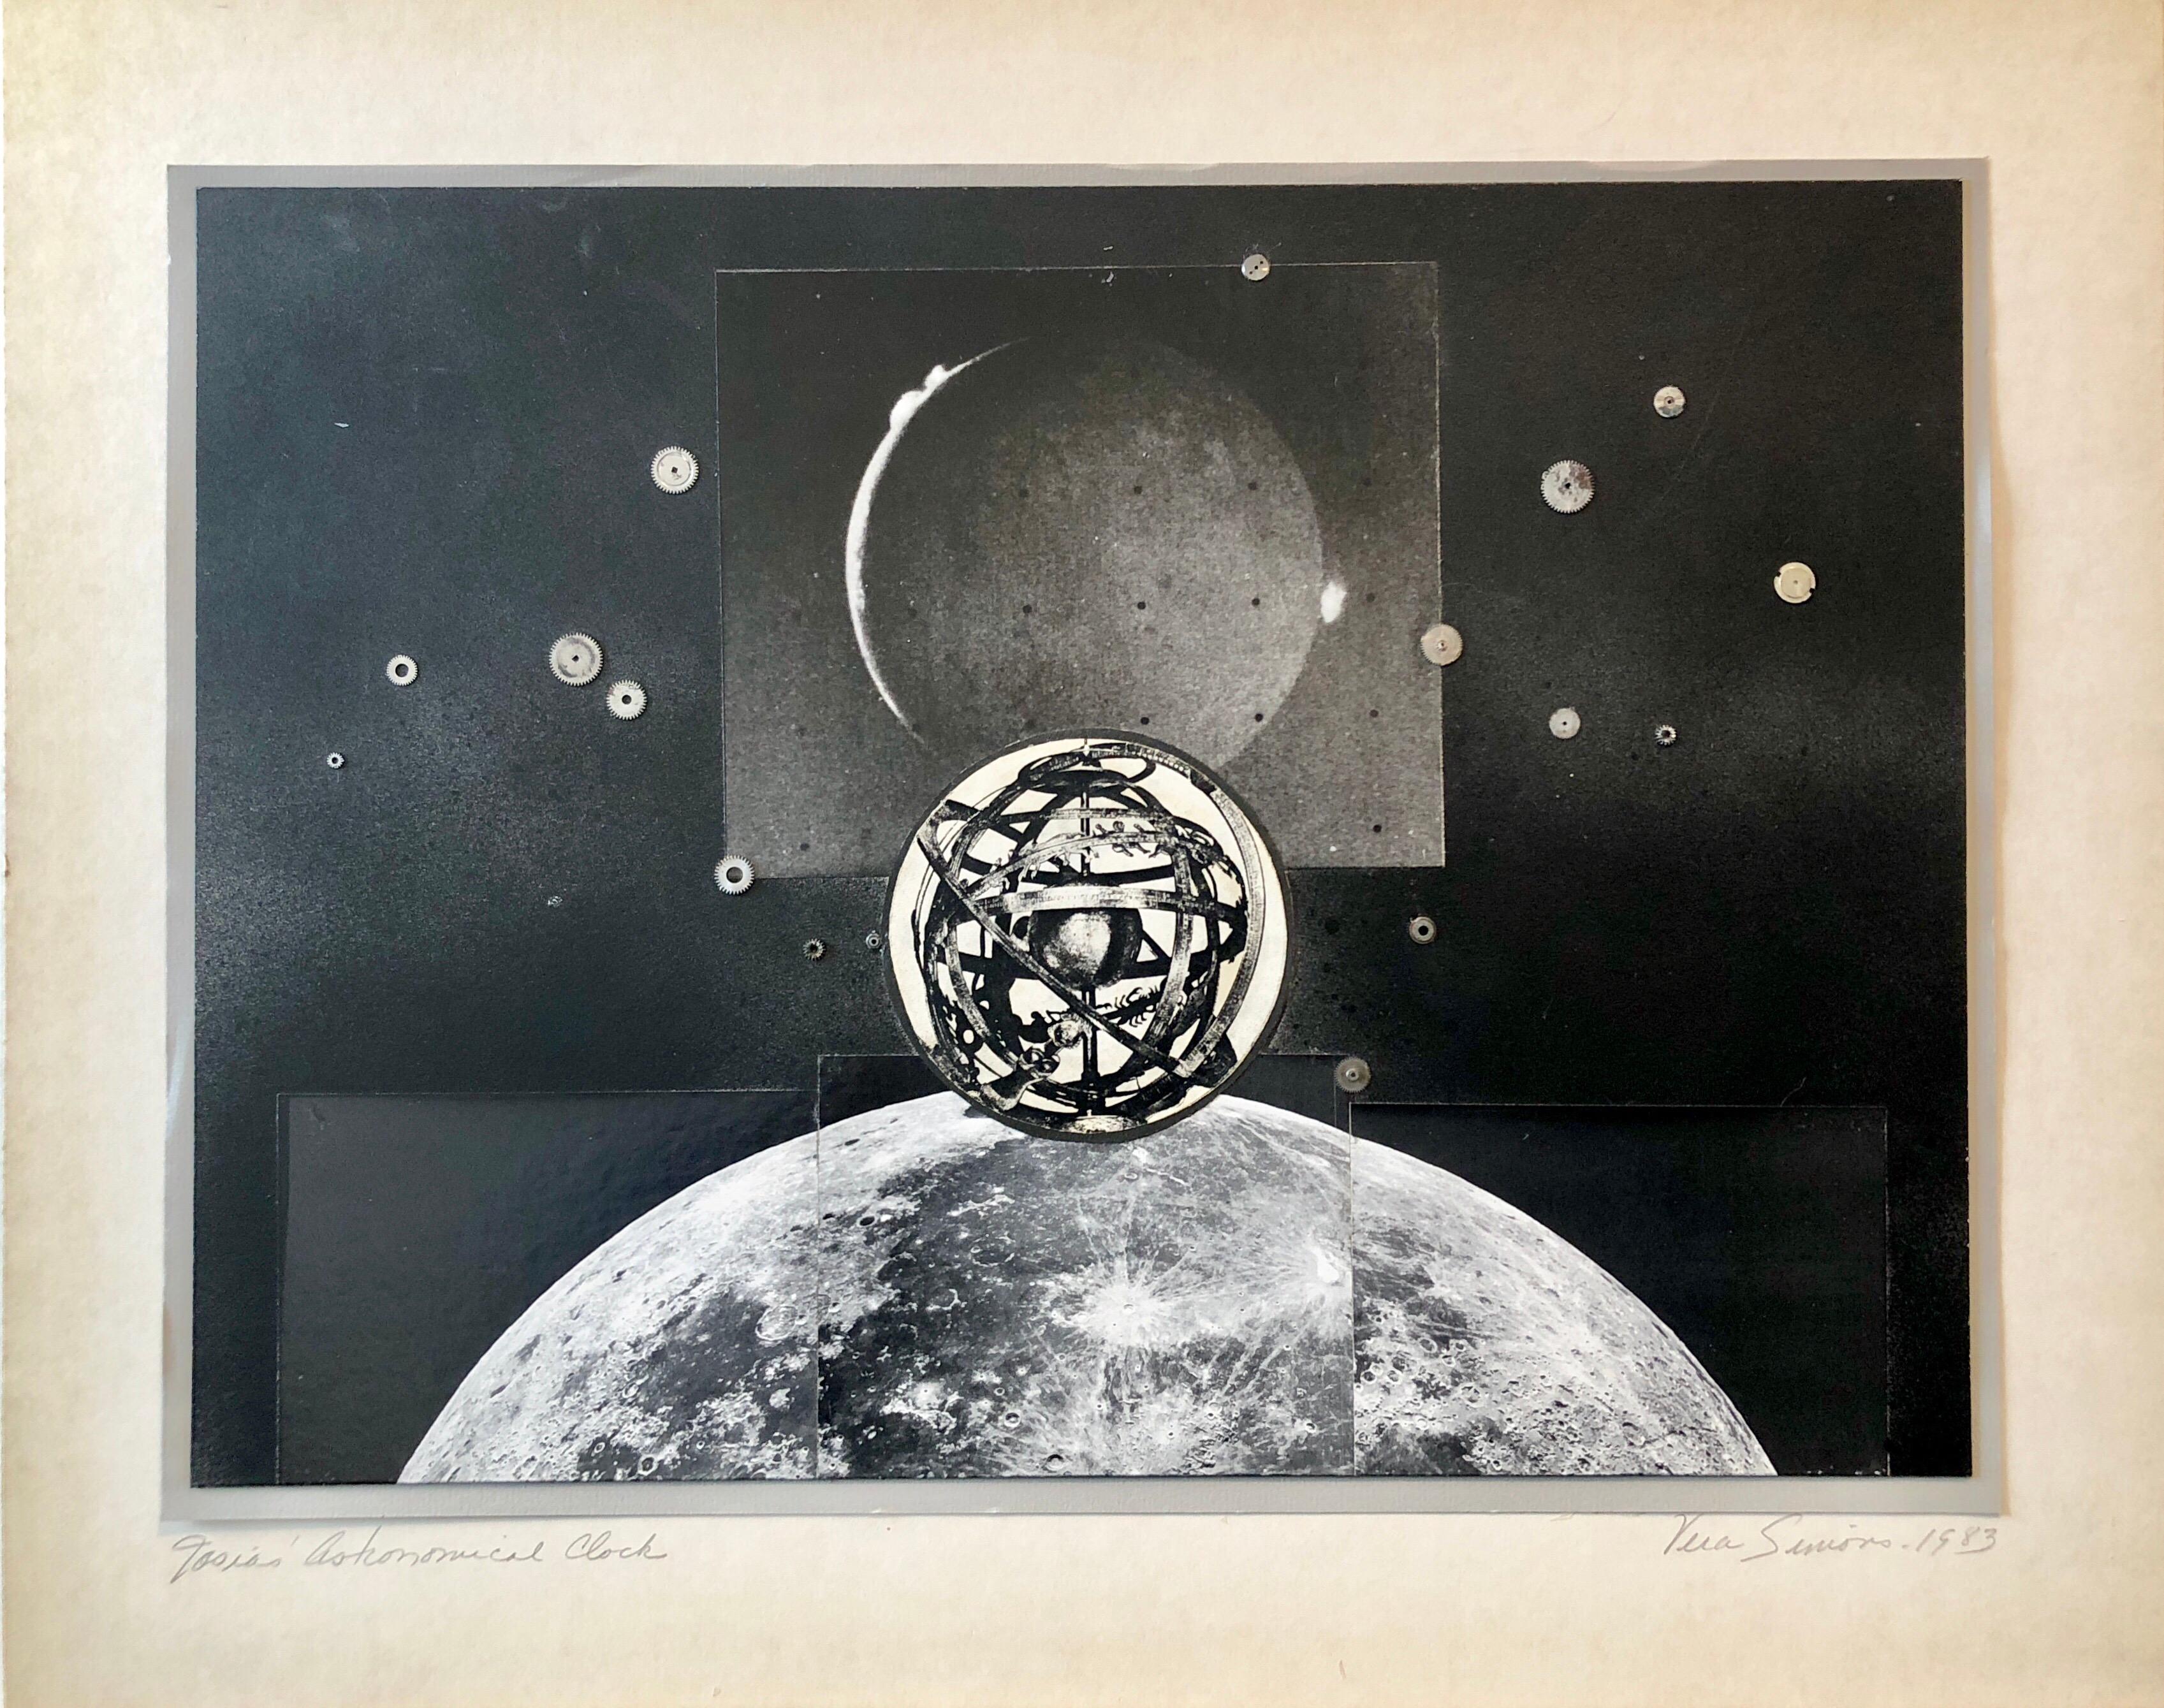 This one depicts a Planetary assemblage with small watch parts (metal wheels) collaged on to it.
It is titled Josias Astronomical Clock
SIMONS, Vera (1920 - 2012)
Vera Habrecht Simons, was a German/American aviation pioneer, aeronaut and photo